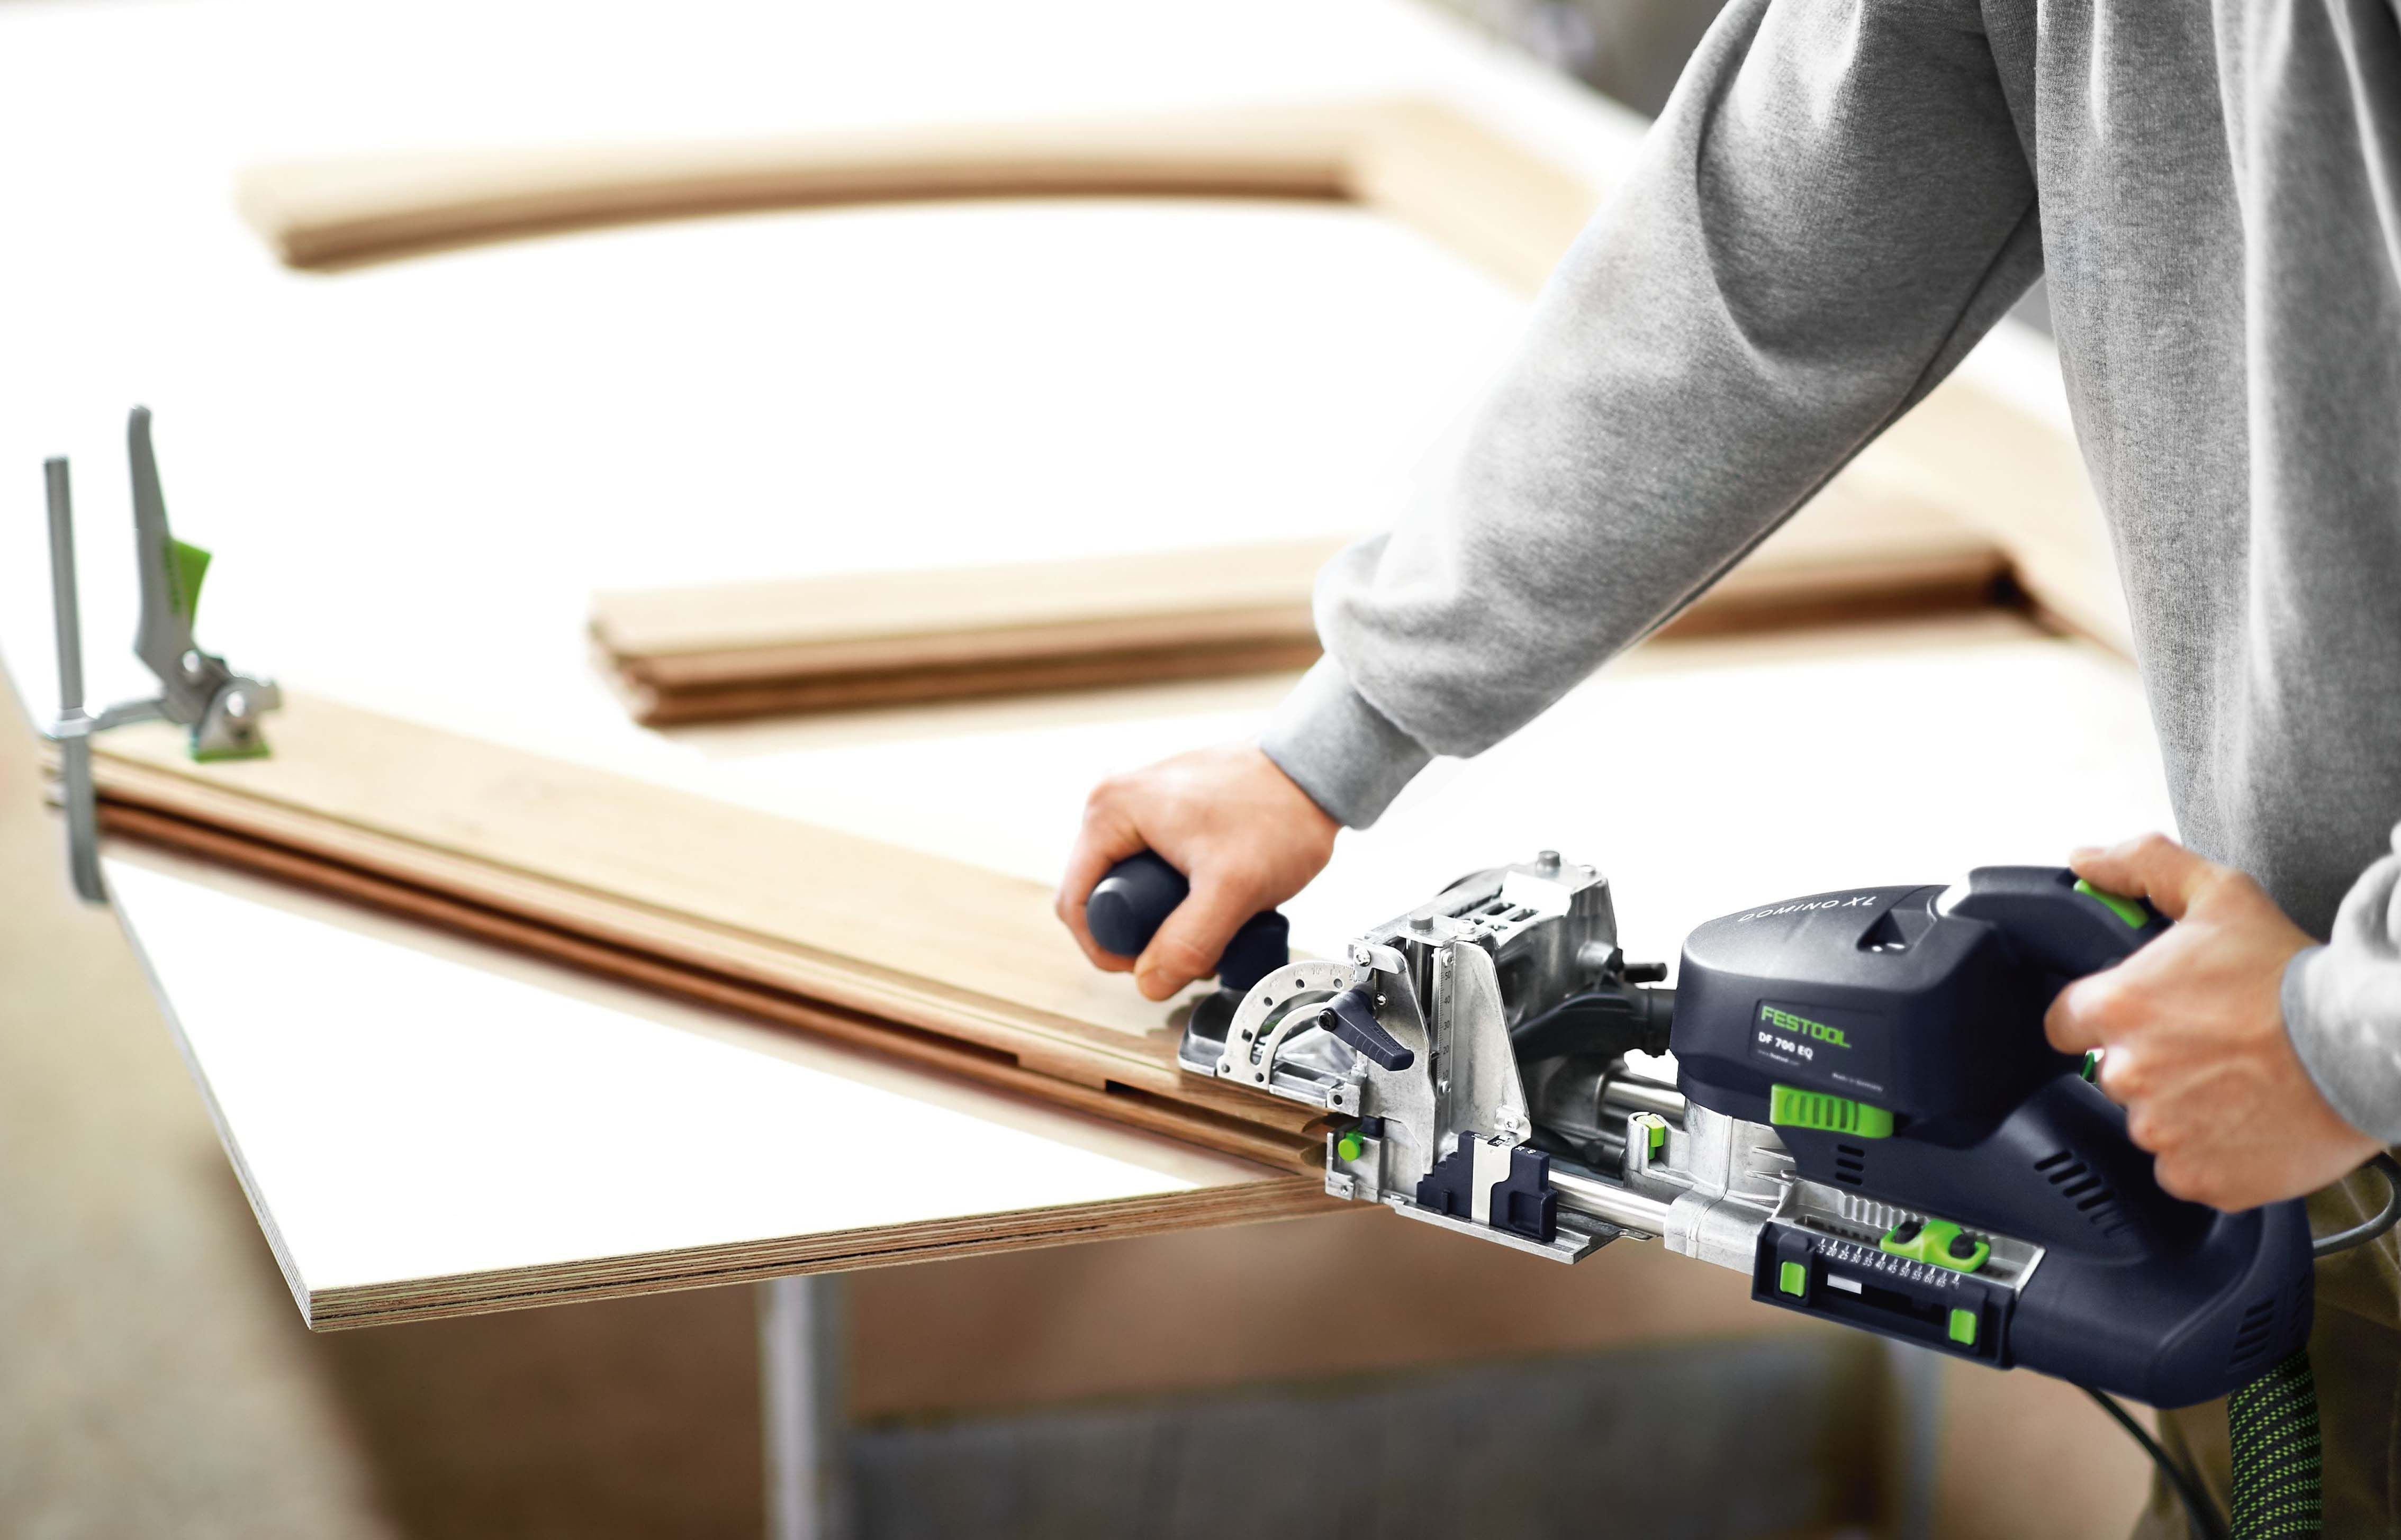 DF 700 DOMINO Joining Machine in Systainer 576429 by Festool